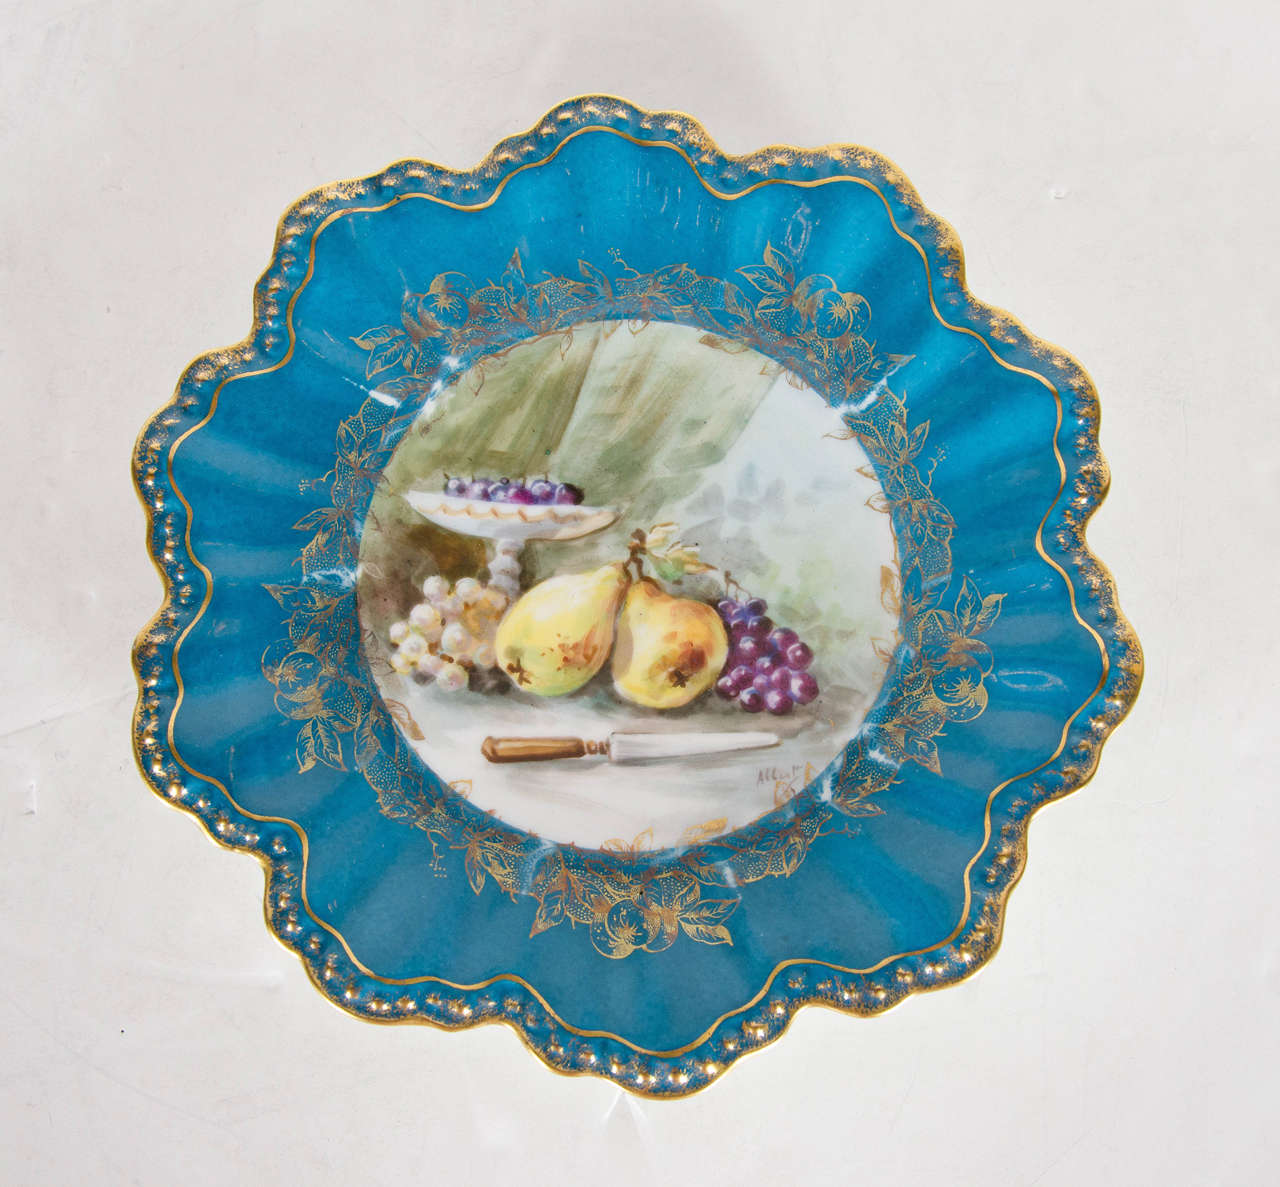 This elegant set of 12 hand-painted desert plates features a scalloped edge gilded with 24-karat yellow gold. The centre of each plate has been painted with a different realist still life. One features apples, a water carafe and glass, and a bread